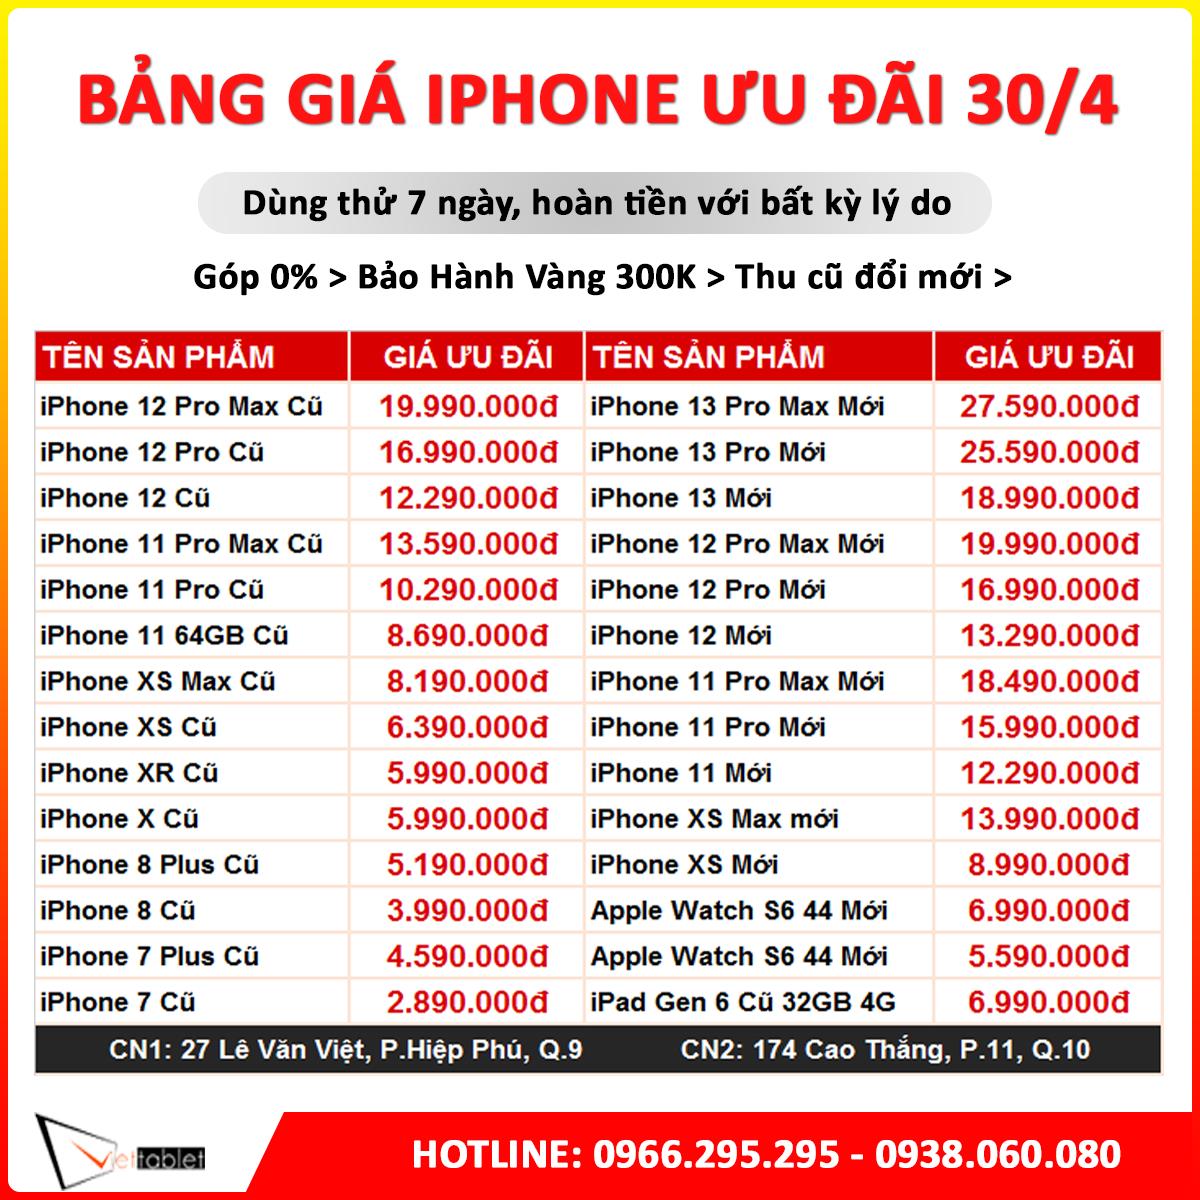 Price list for iPhone Sale on April 30 at Viettablet - New iPhone 12 is 13.2 million, old 11 Pro Max is 13.5 million, Xs Max is shocked to 8 million.  - Photo 1.